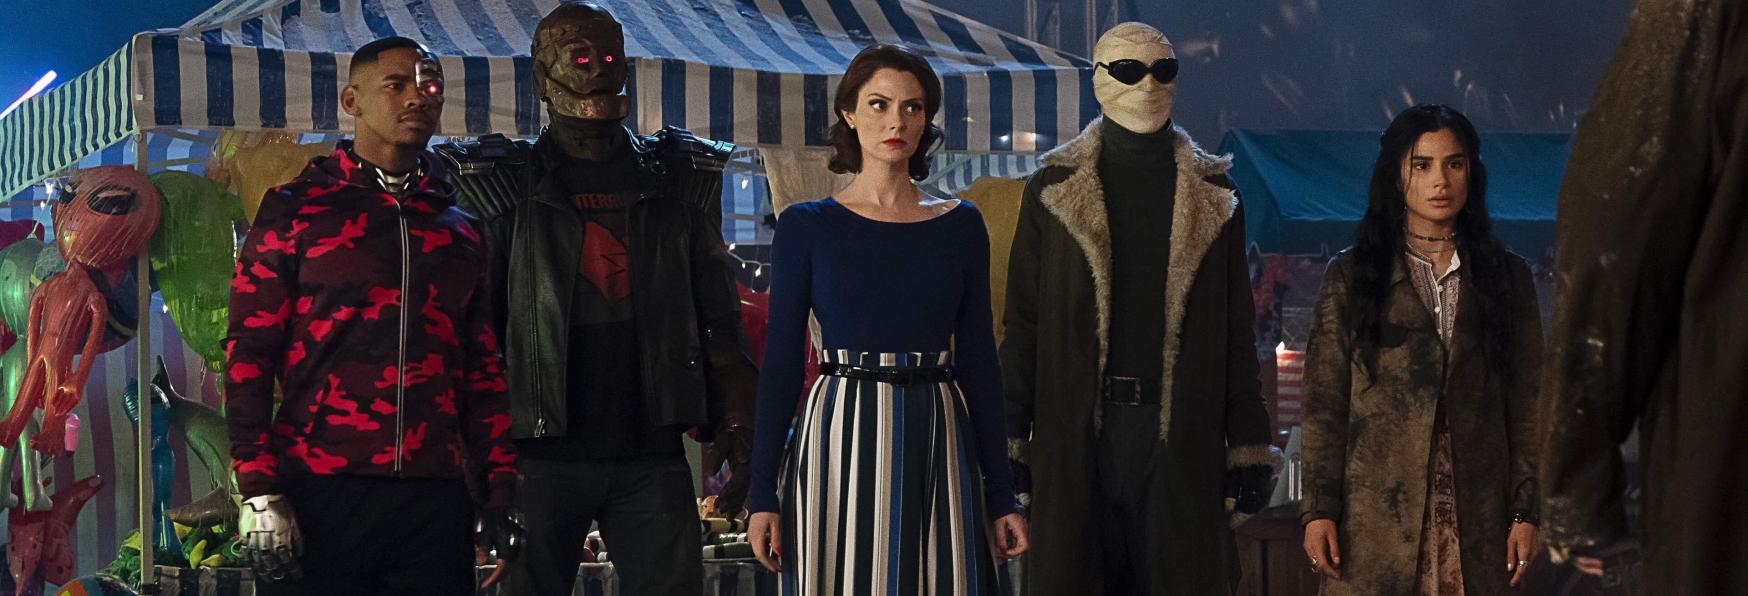 Doom Patrol Season 3: Release Date, Storyline, Cast and more about the Show!